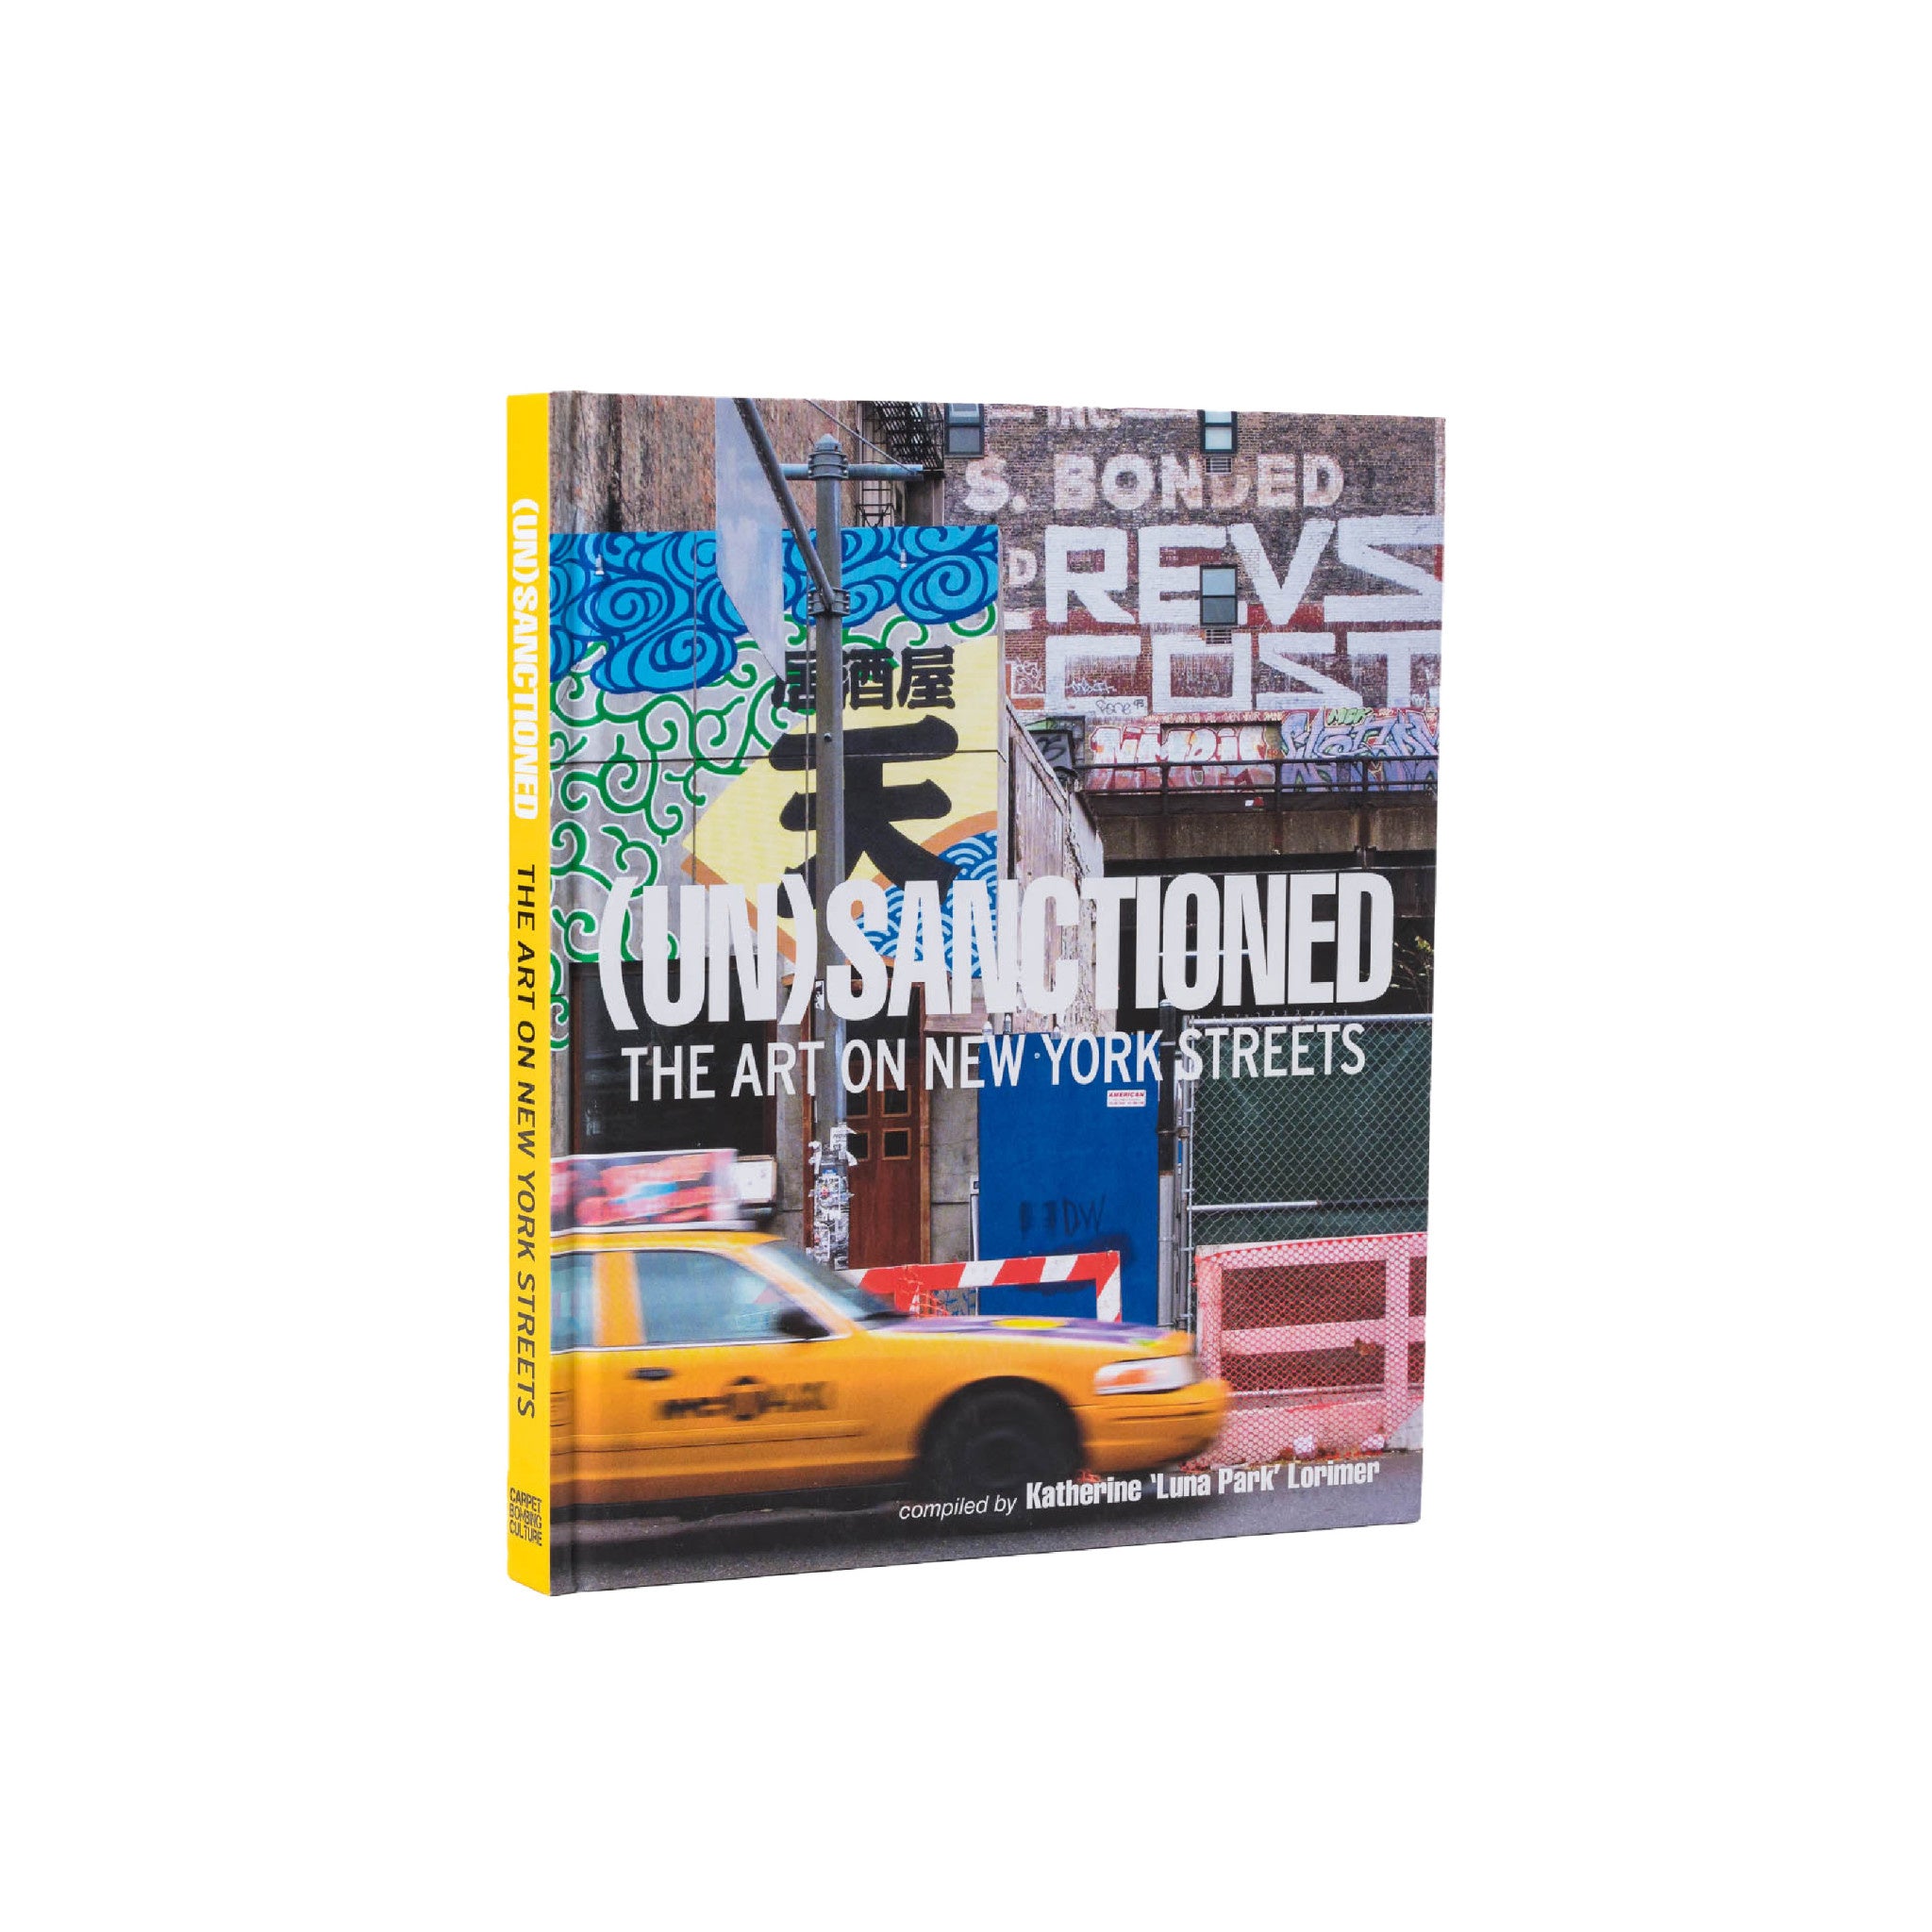 Unsanctioned: The Art on New York Streets - Wynwood Walls Shop